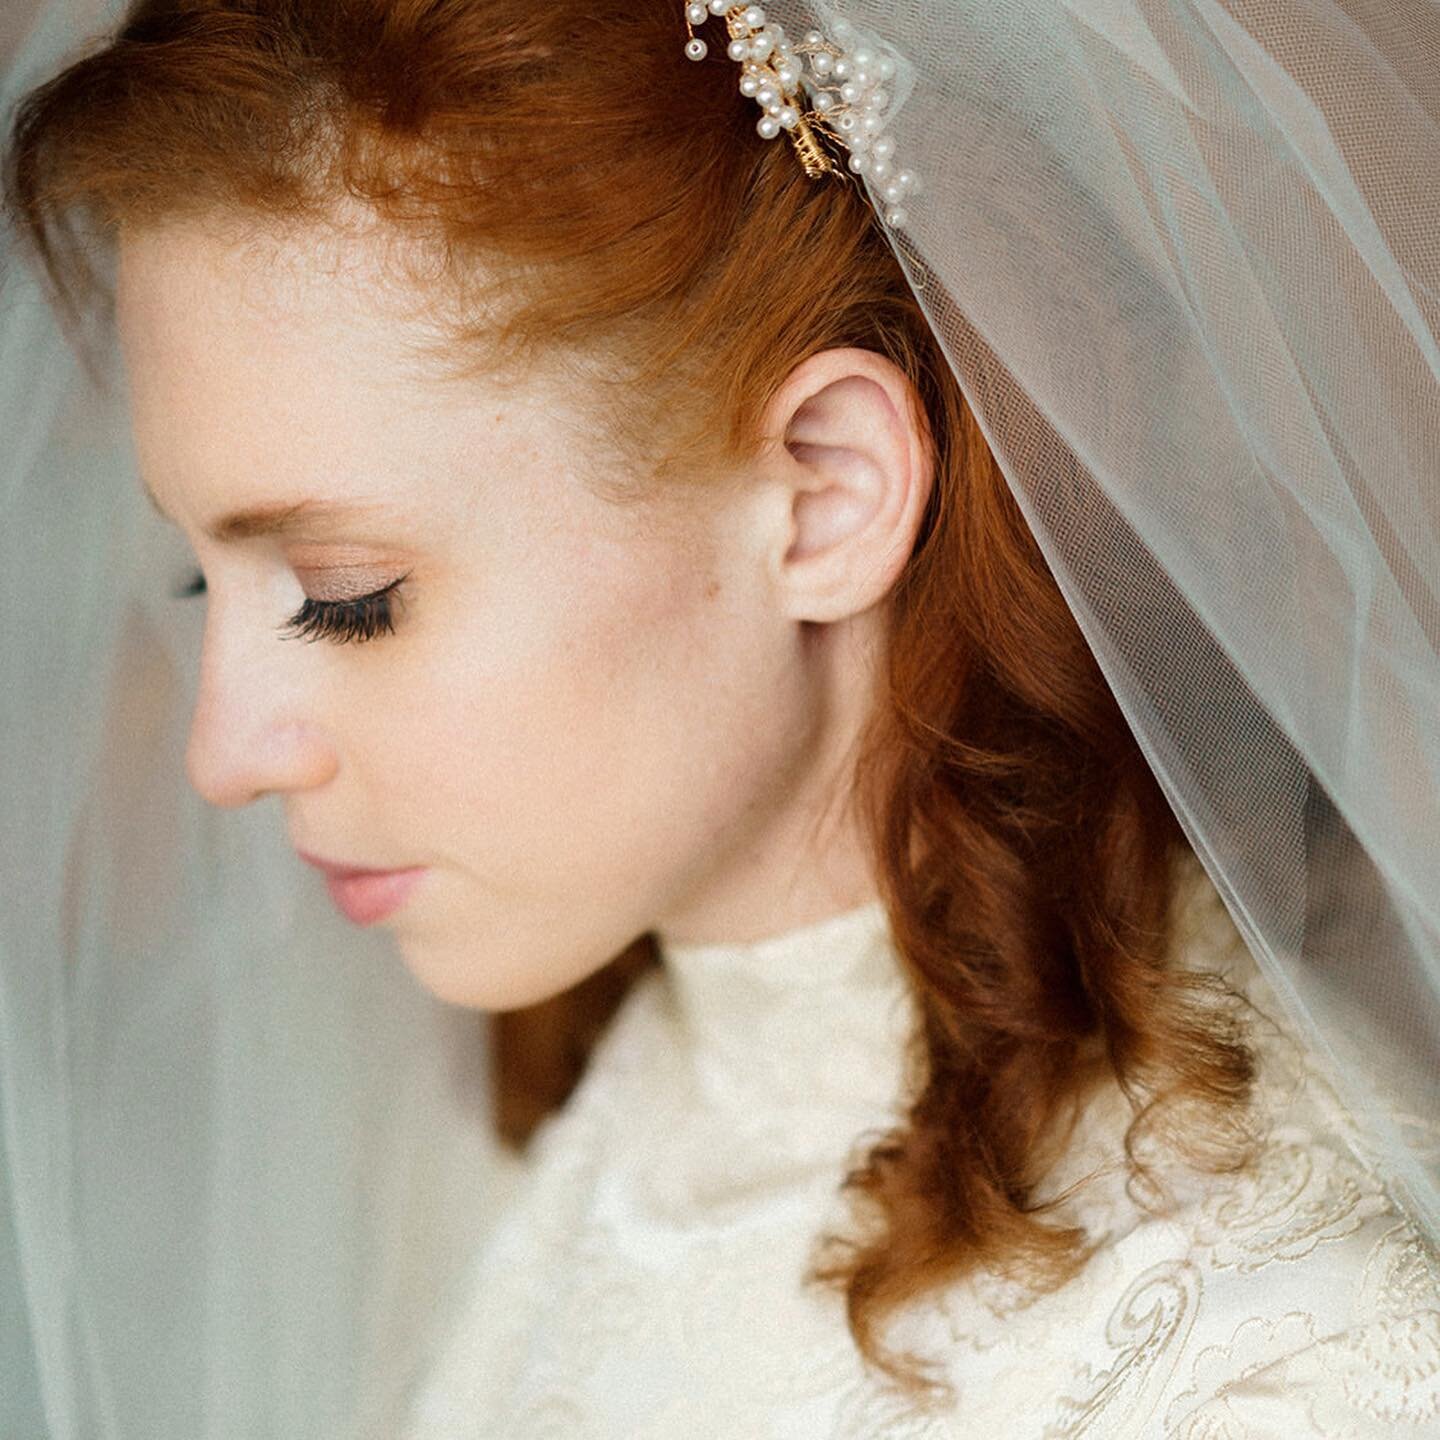 Do you have a favorite facial feature? Let&rsquo;s highlight it! Our genetic makeup is what makes us unique and memorable.

This beauty had the most gorgeous red hair, and I couldn&rsquo;t contain my excitement! For her wedding day we chose muted war